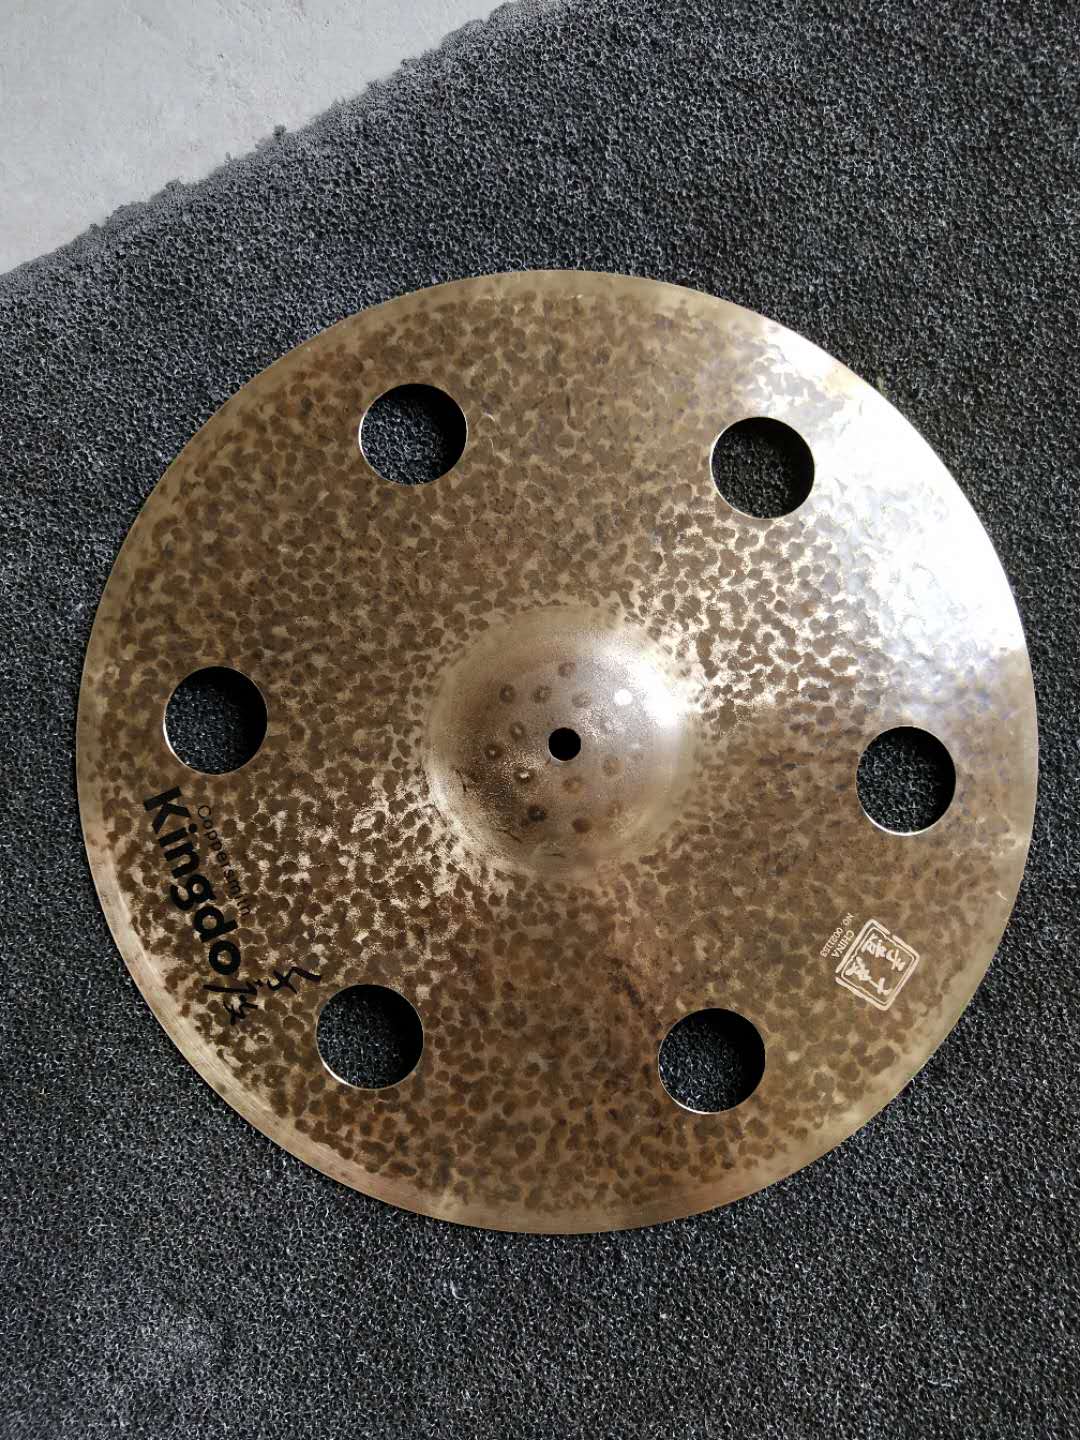 B20 Cymbals With Holes